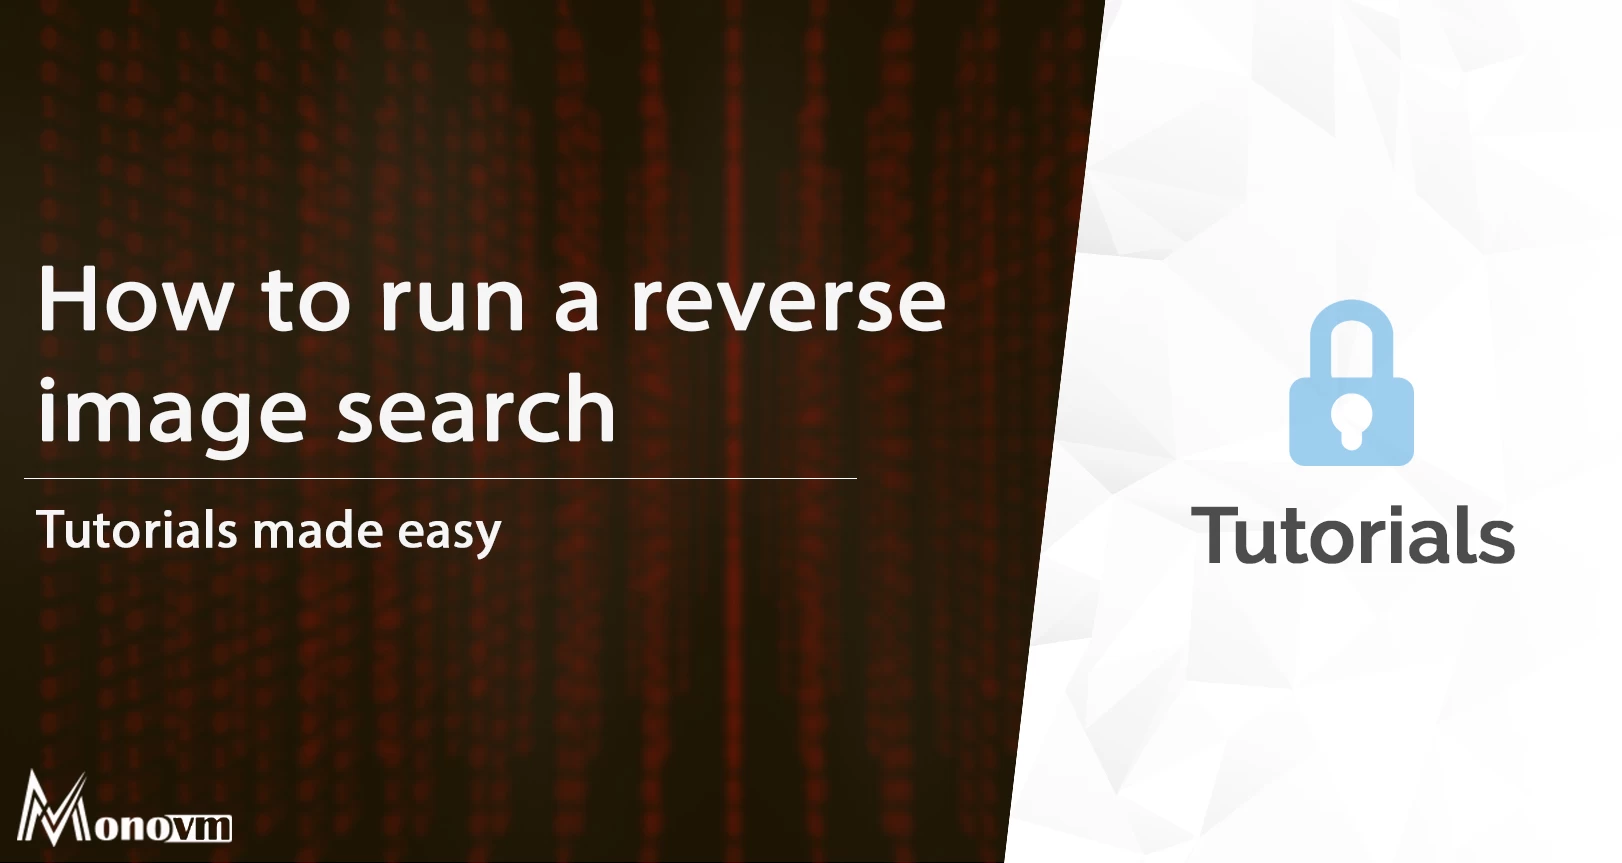 How to do a reverse image search?